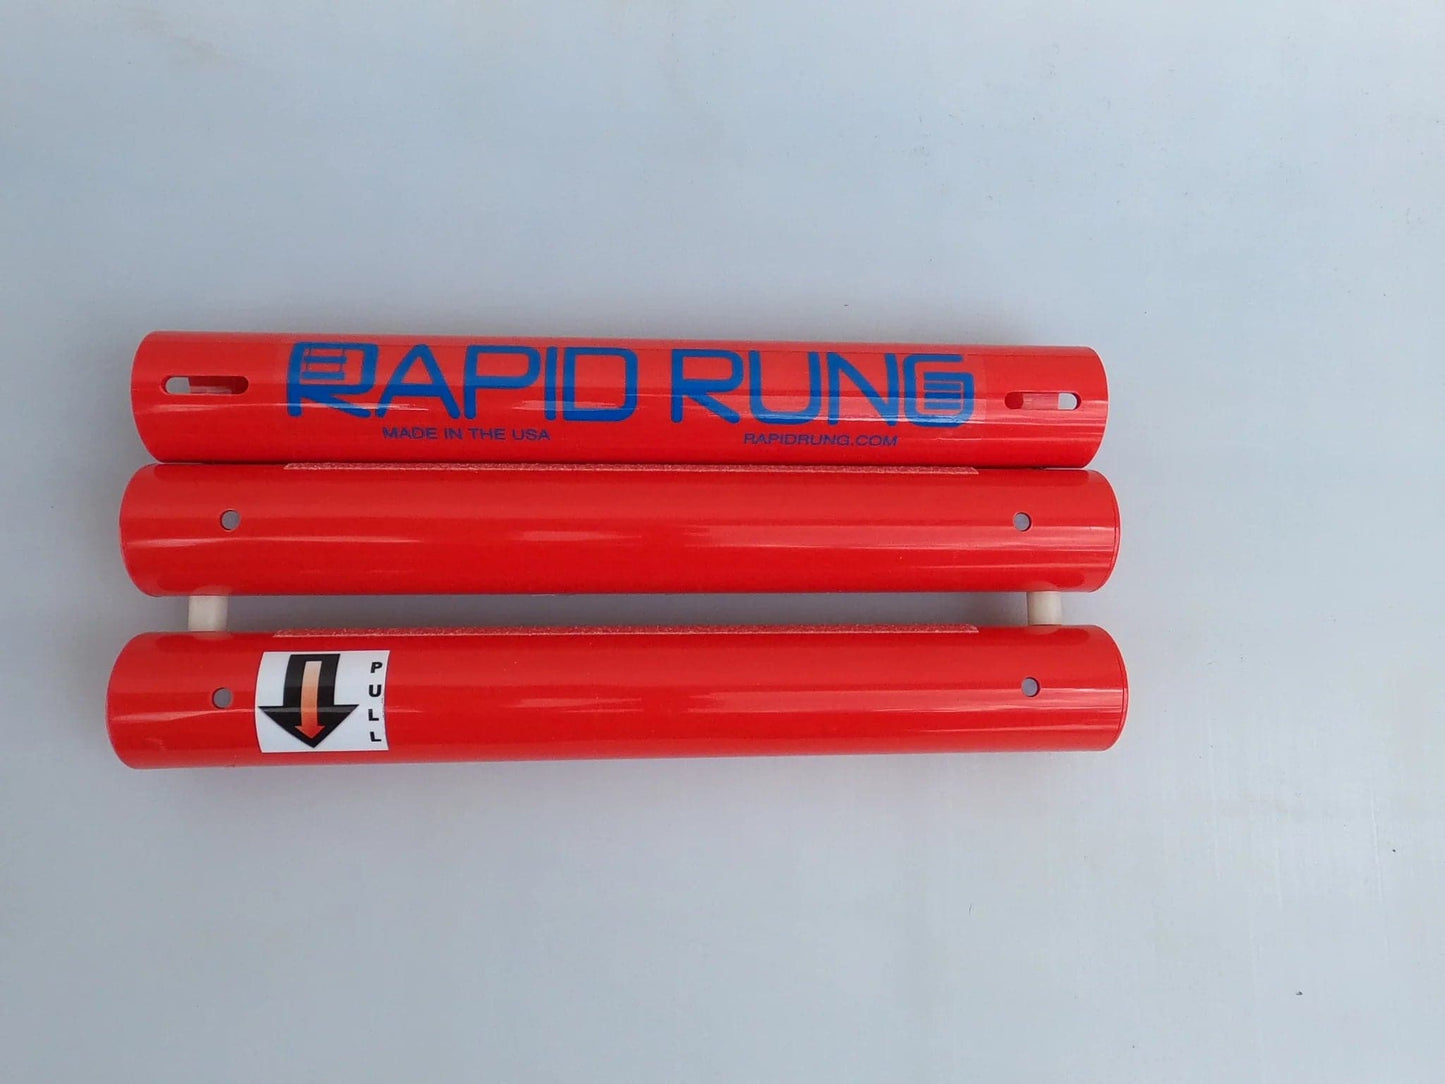 Two red tubes with the word Rapid Rung on them.